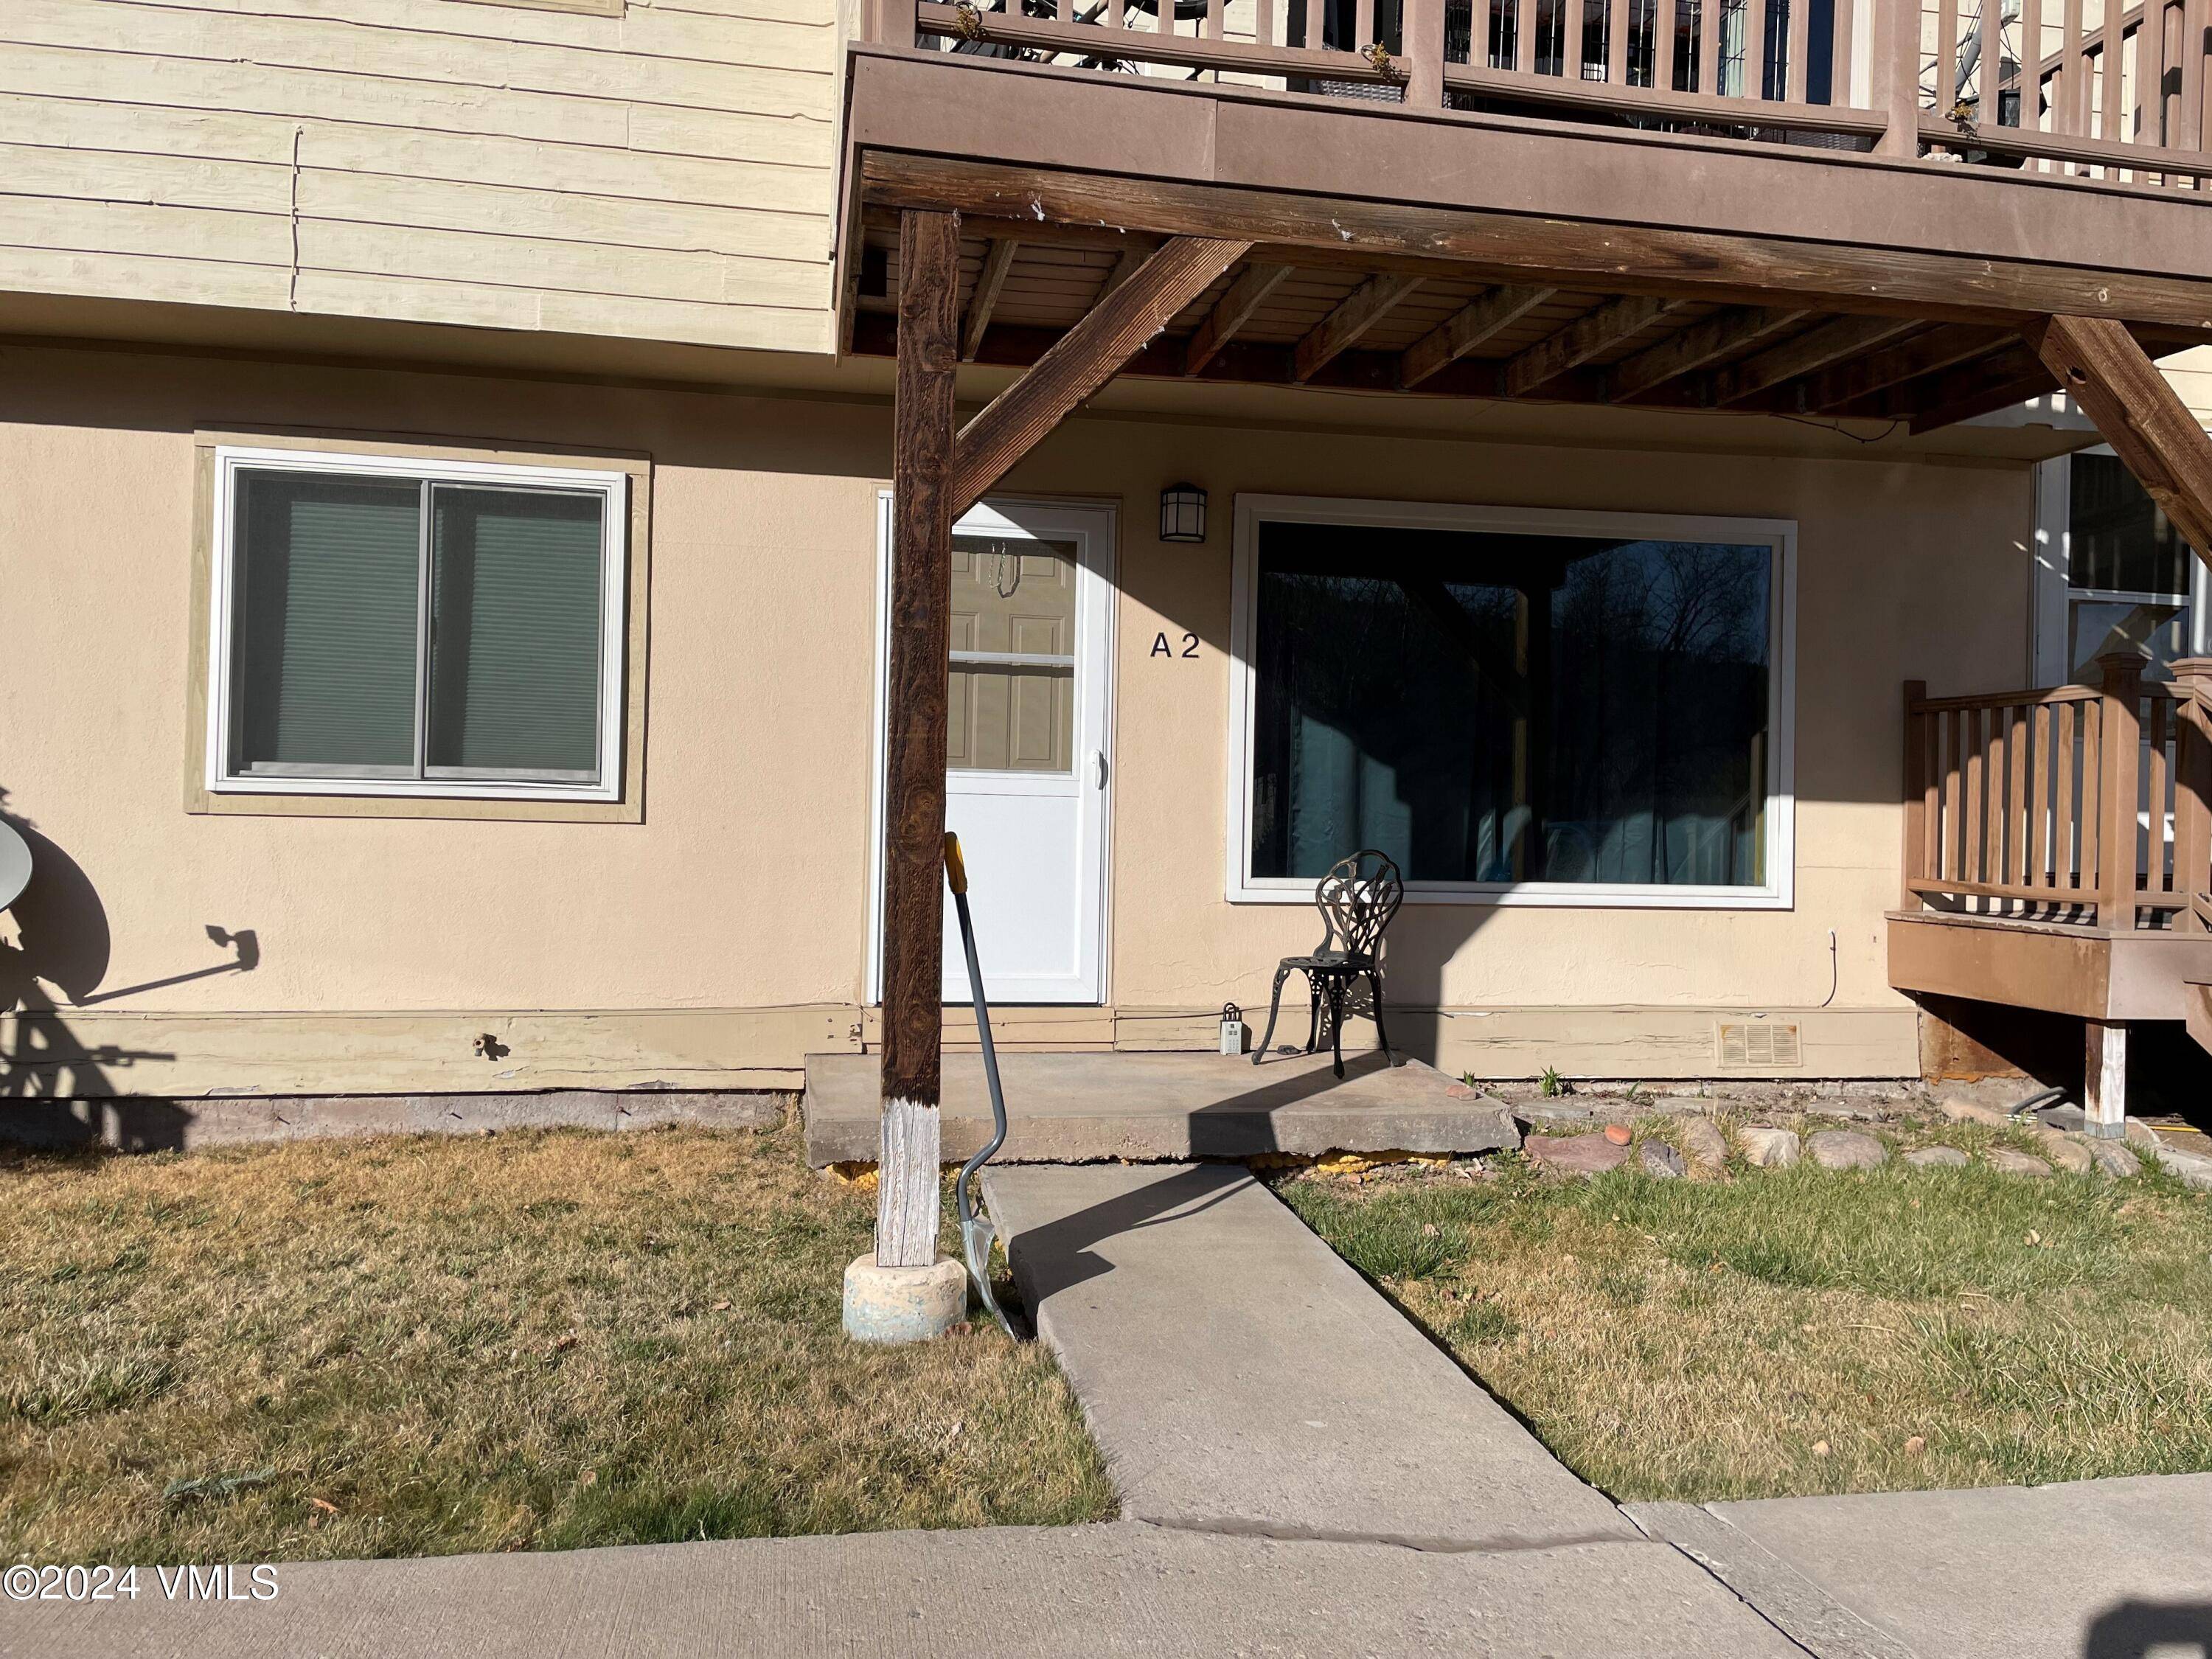 Huge Price Reduction for this Very well maintained 2 bedroom, 1 full bath ground level condo with newer water heater and Anderson windows and doors.